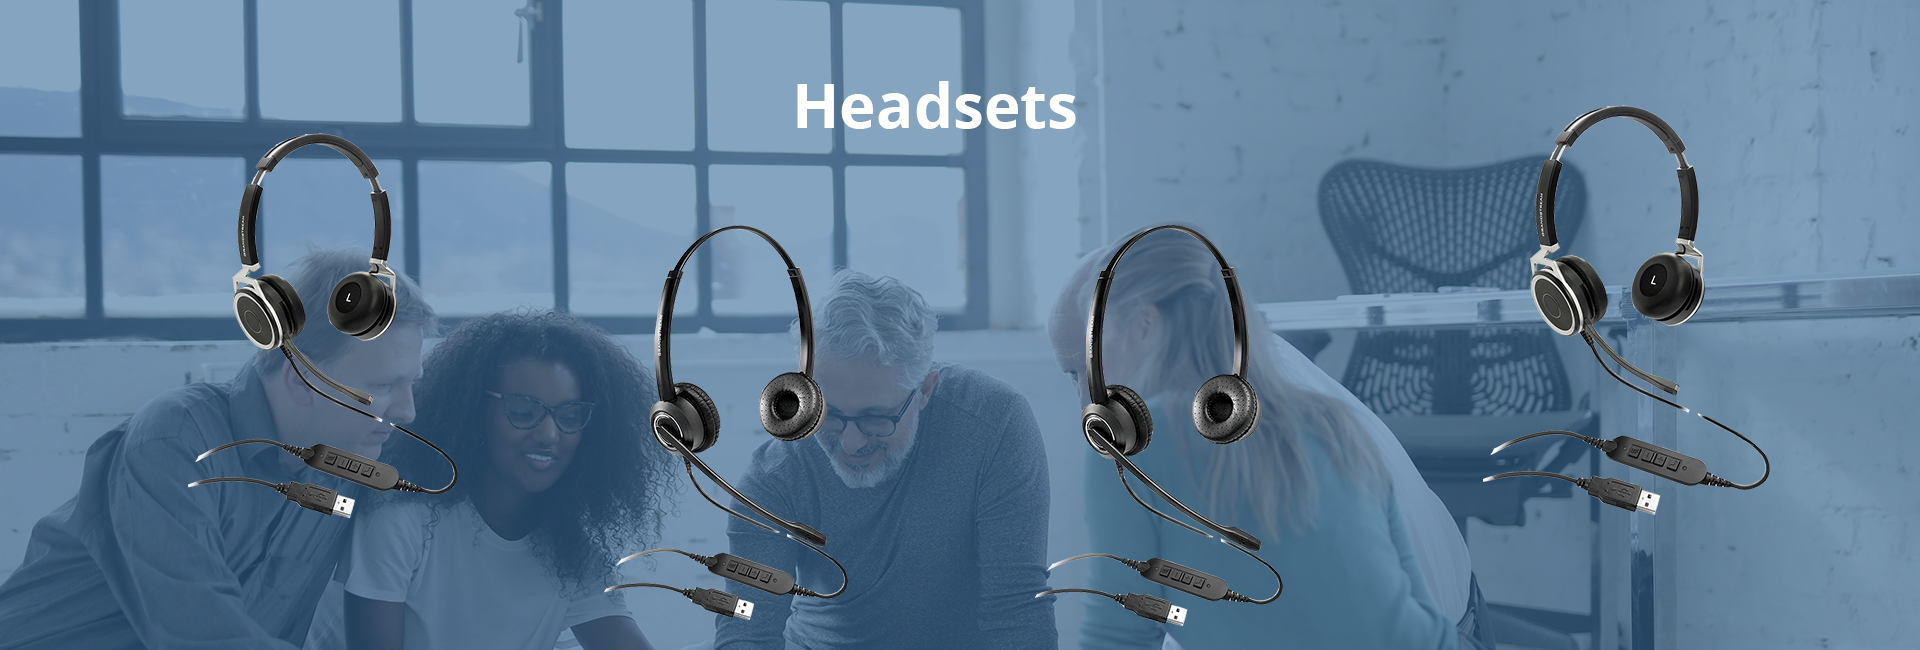 image of headsets with HD voice quality for business communication from grandstream India